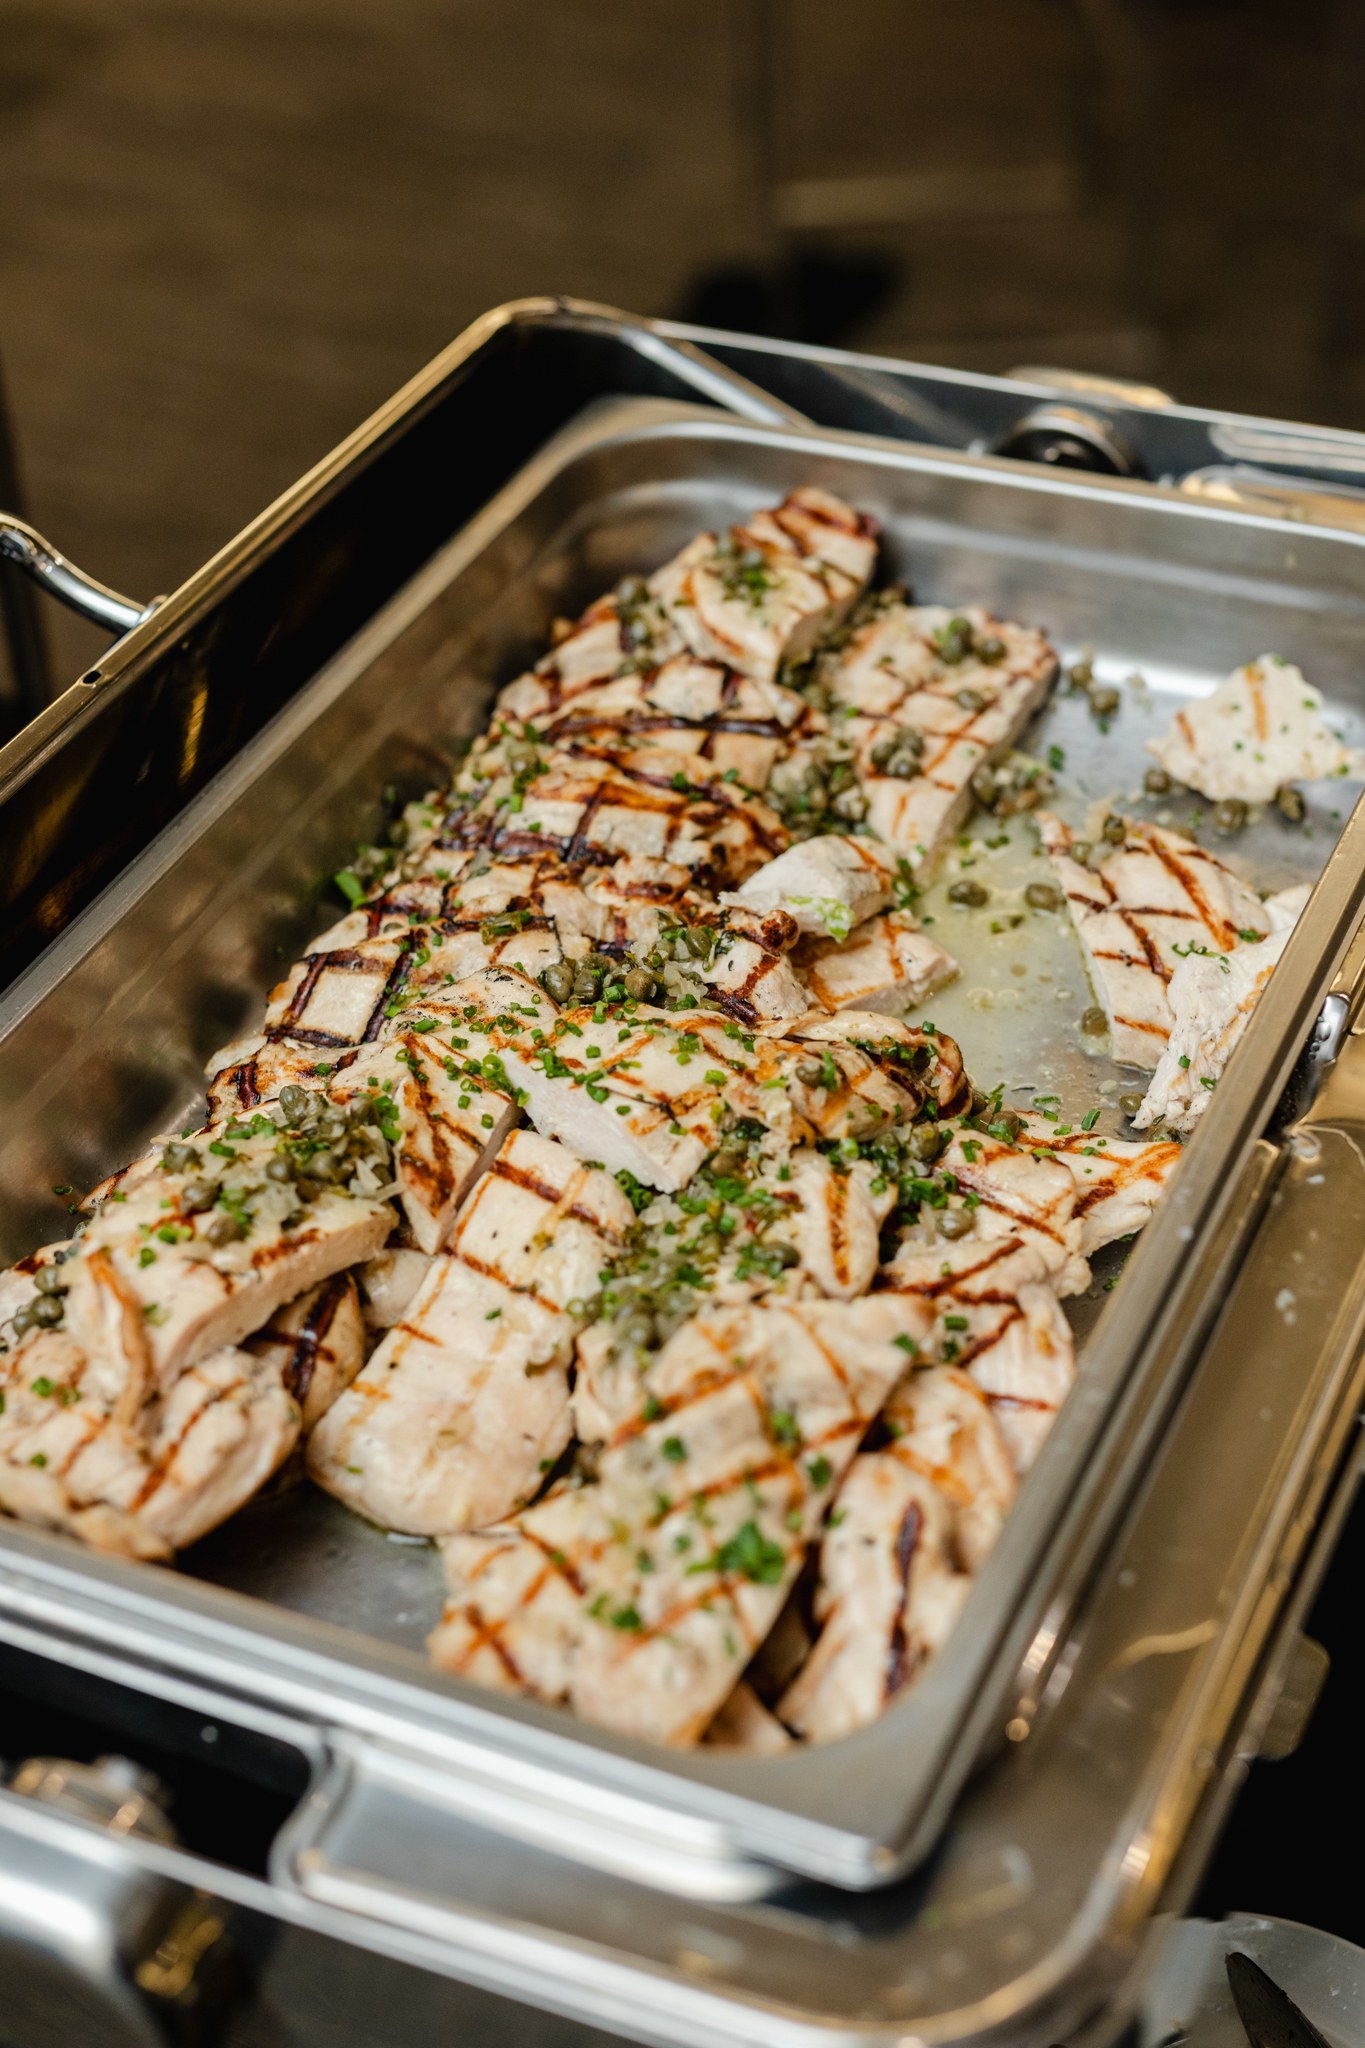 Capturing a tray of succulent grilled chicken during a conference.